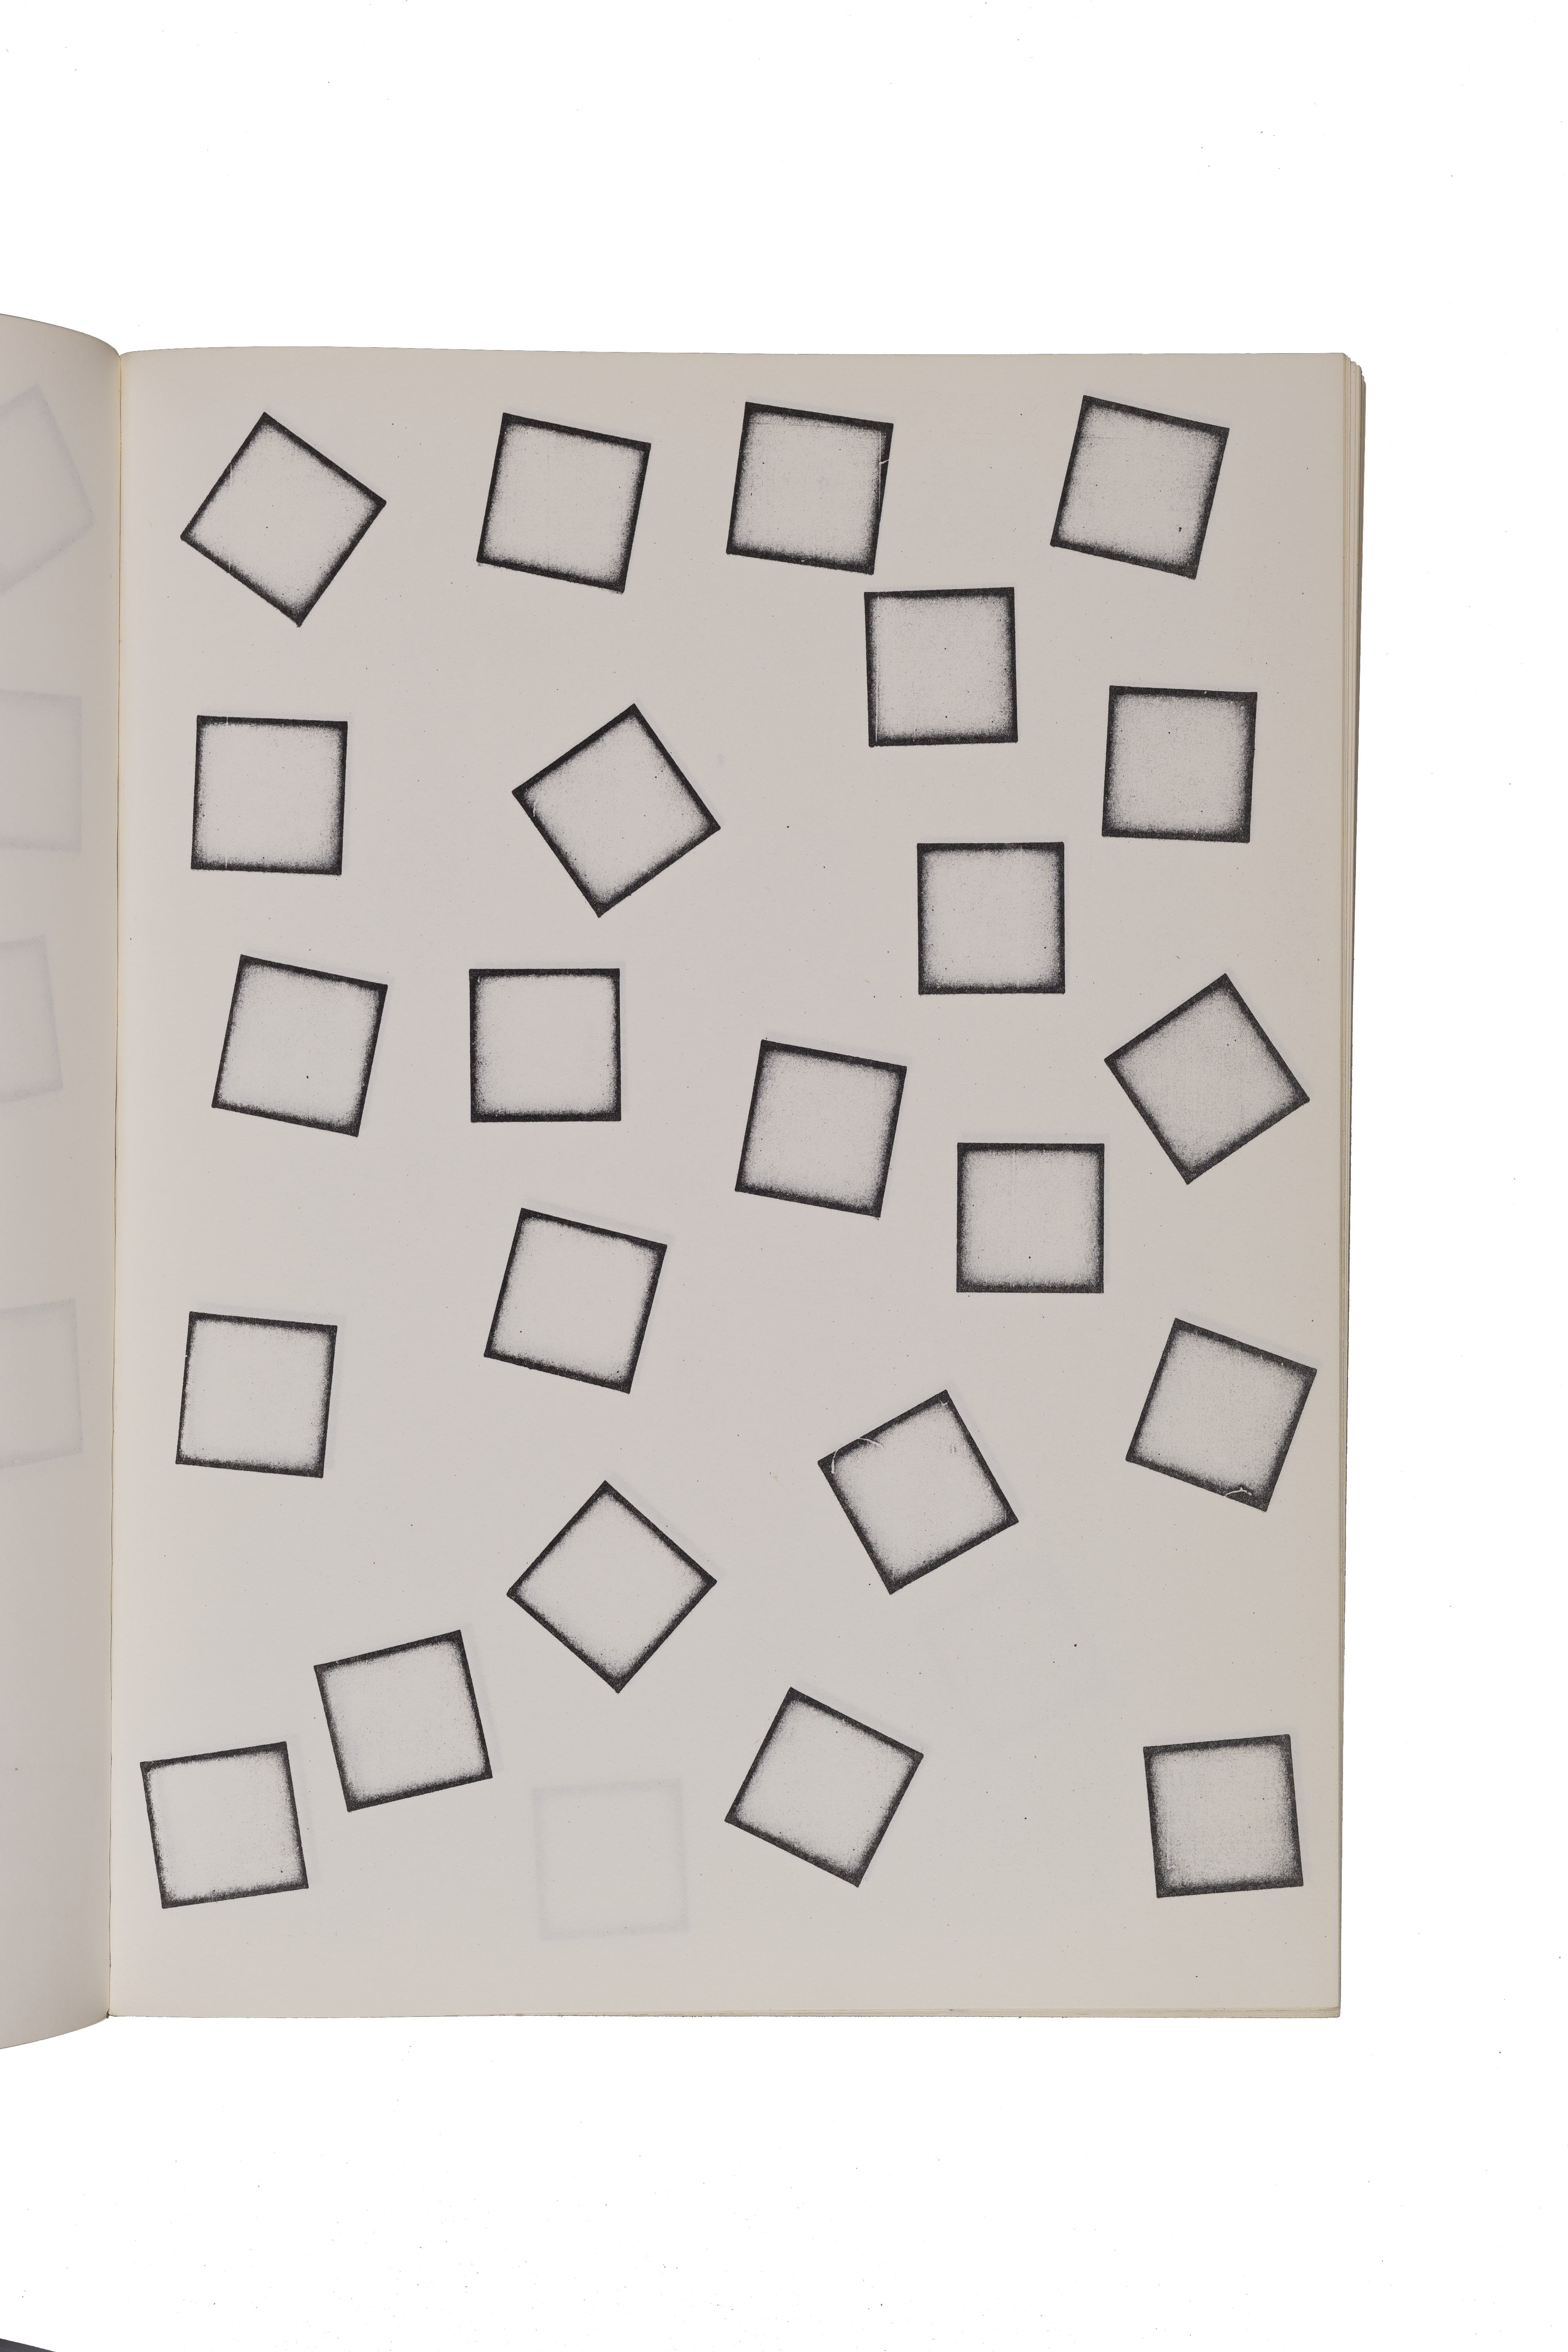 Seth Siegelaub and Jack Wendler: The Xerox book, 1969 (this page: Carl Andre)